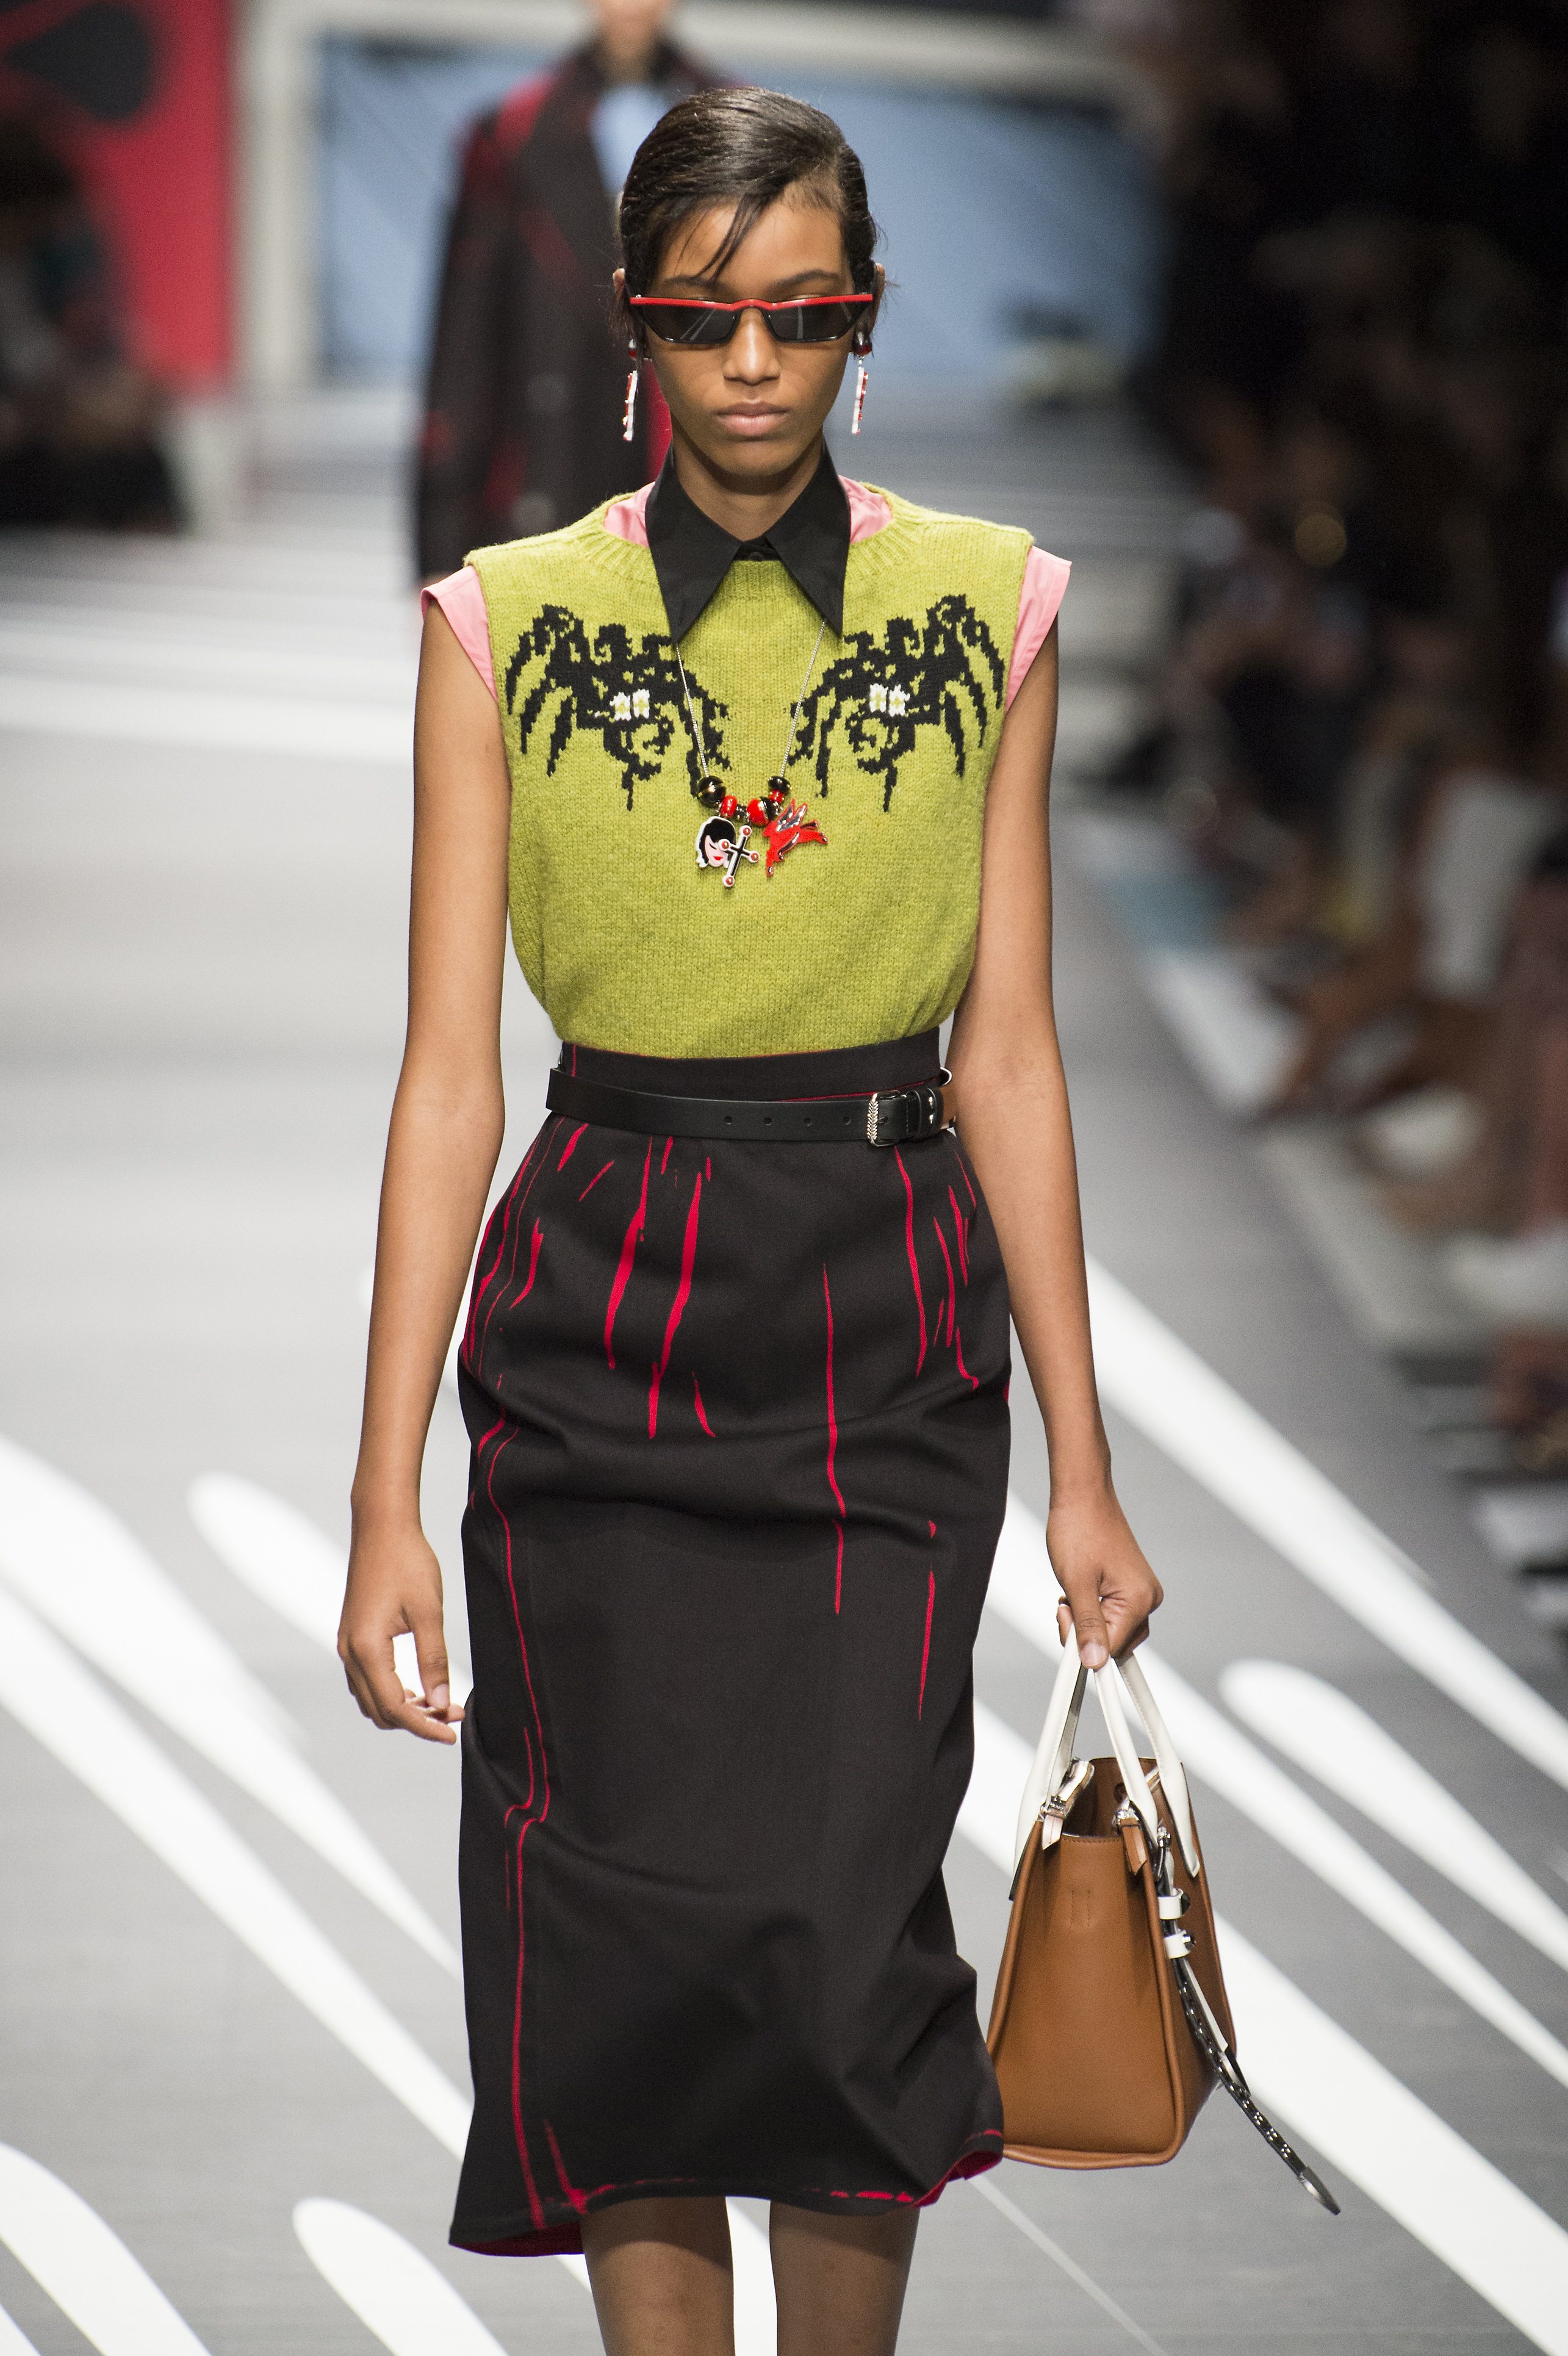 Prada will Present Their Cruise 2019 Collection in New York - FASHION ...